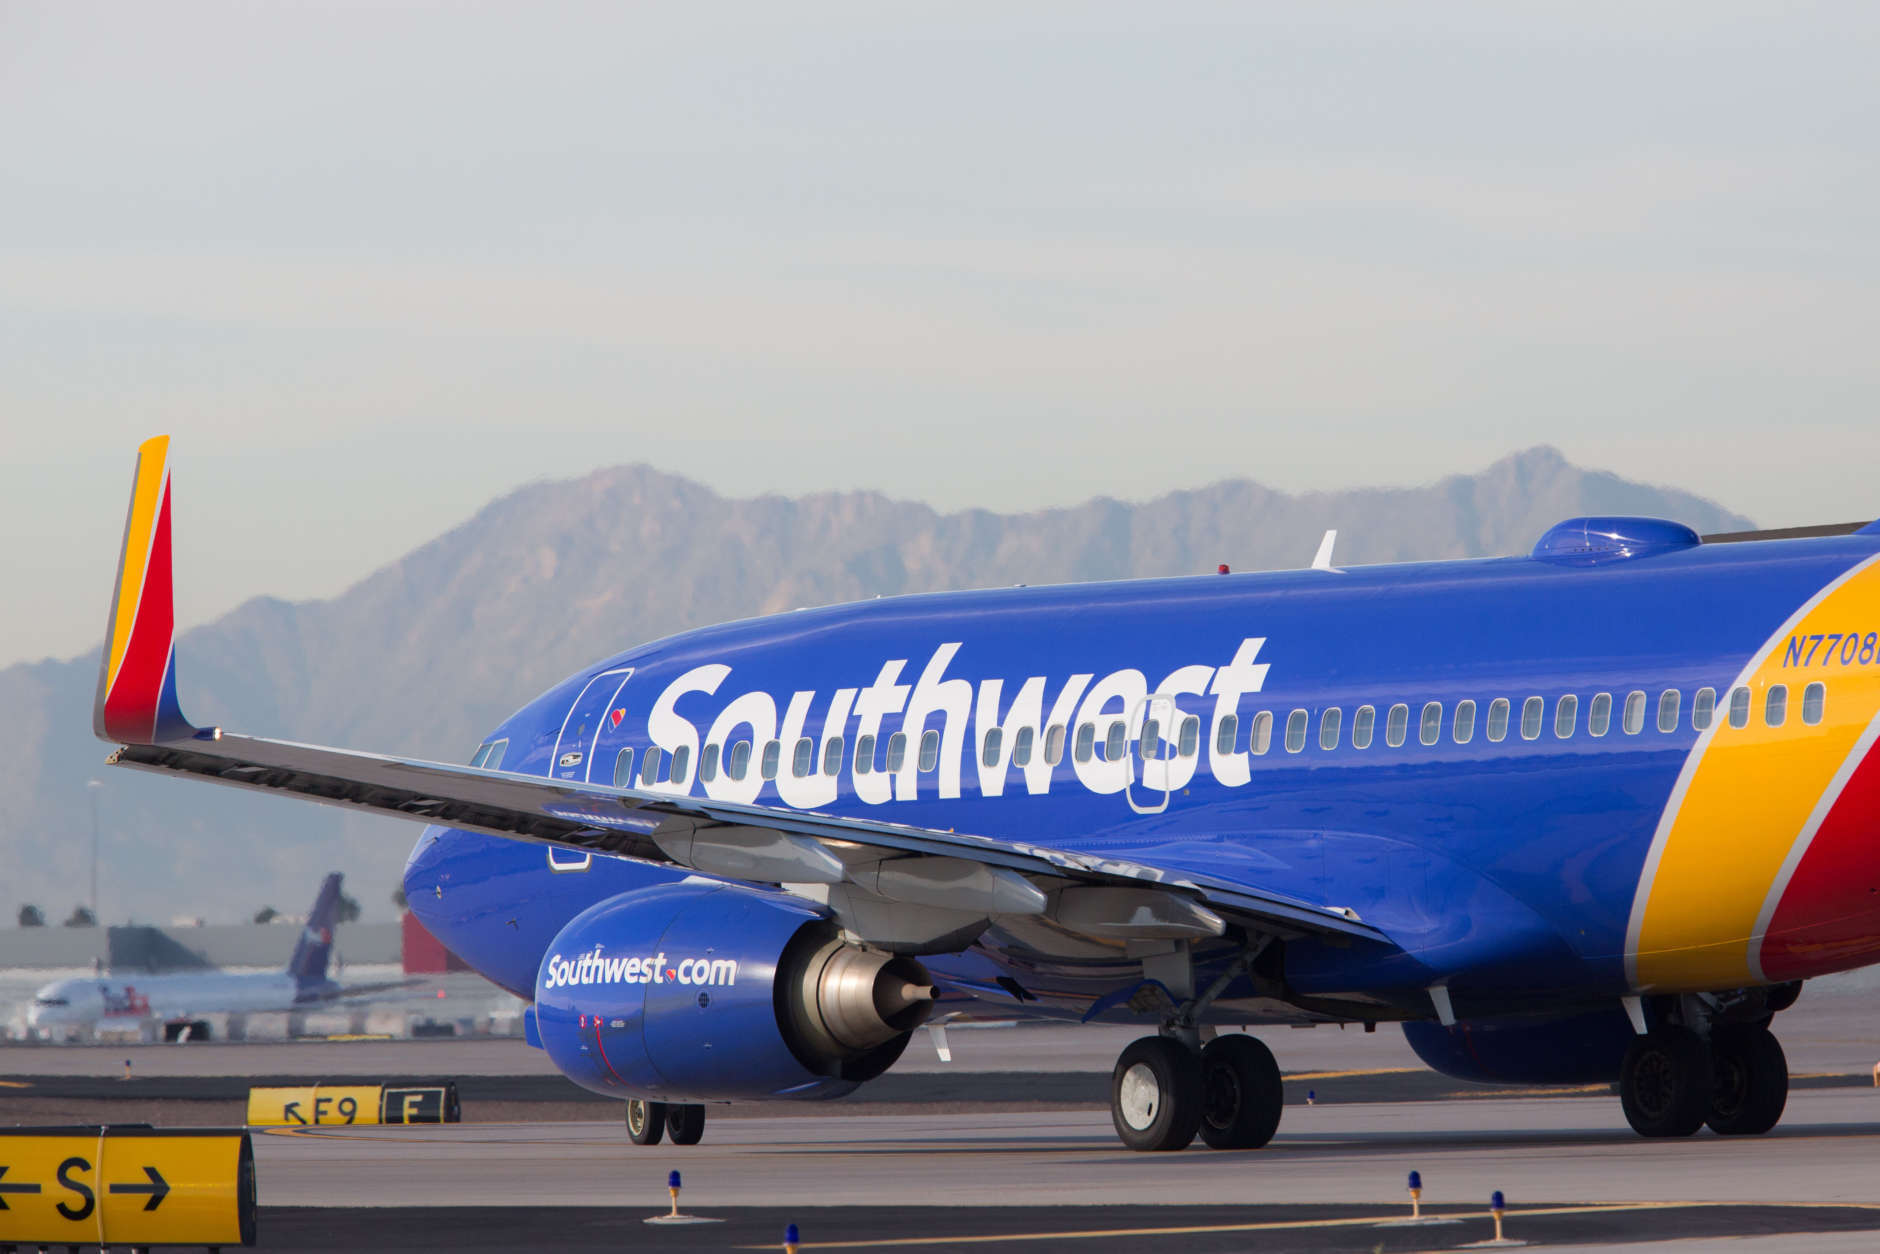 A Southwest Airlines Boeing 737 on a taxiway